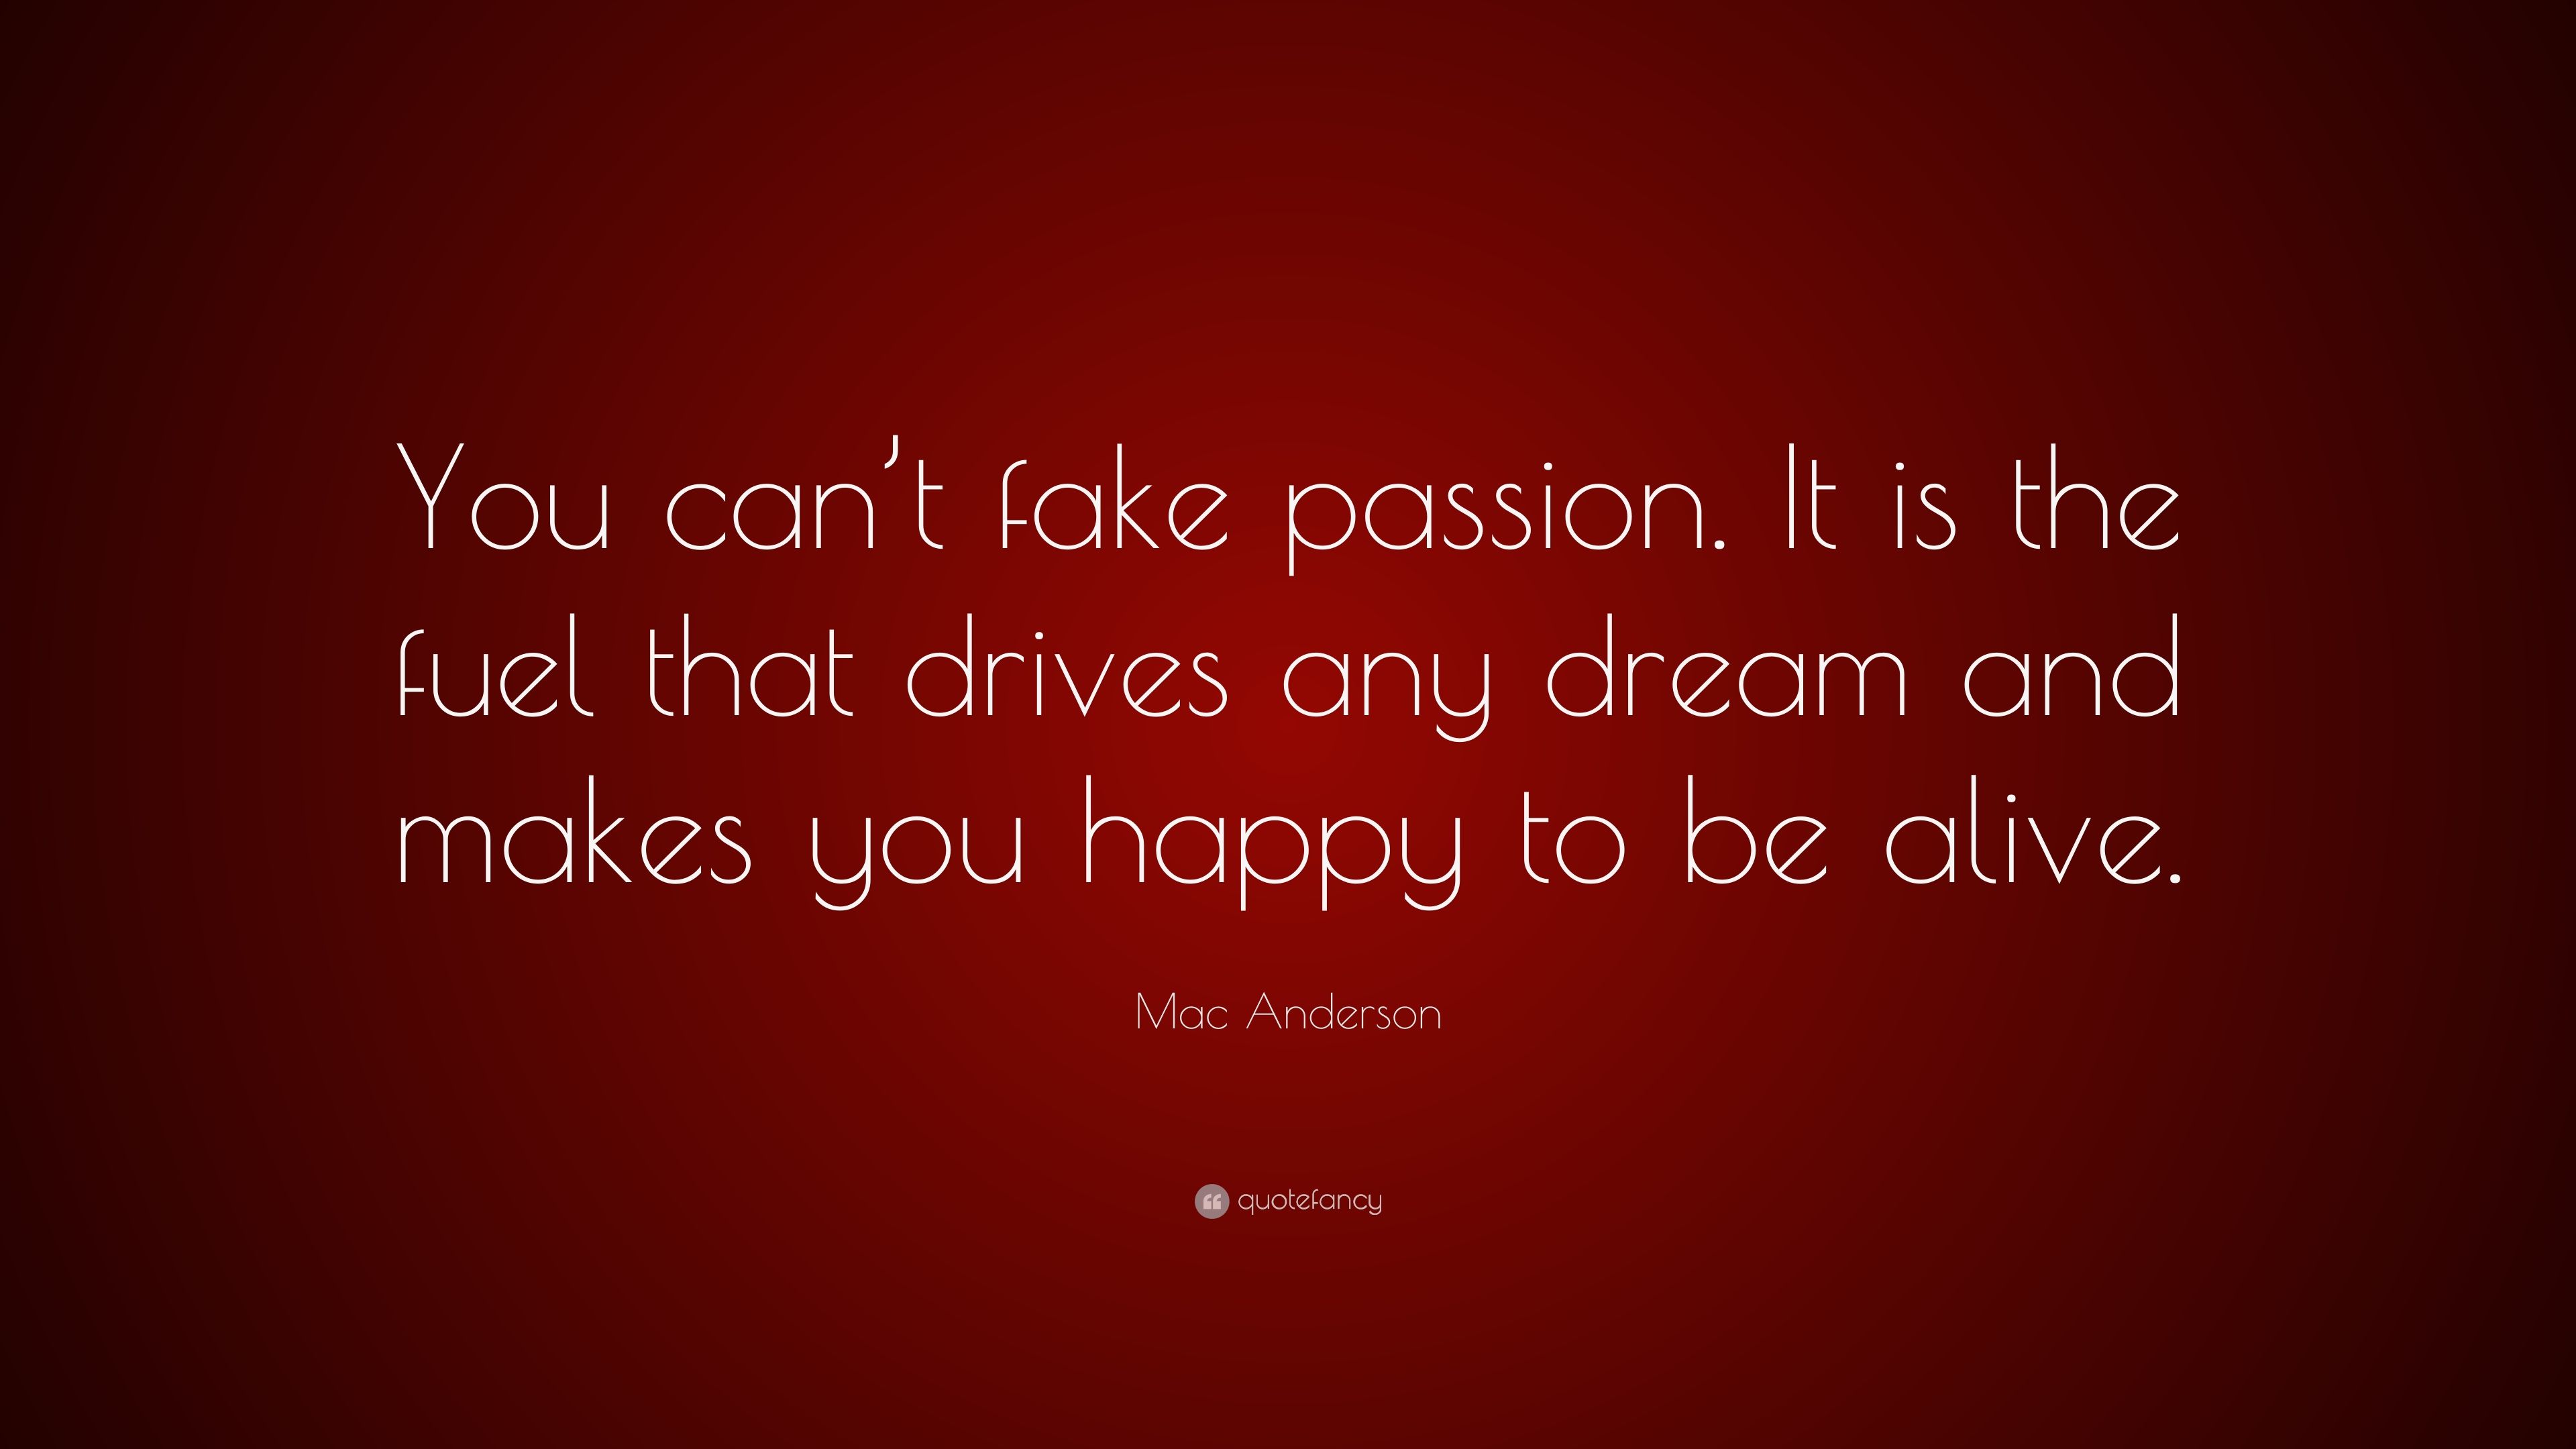 Mac Anderson Quote: “You can't fake passion. It is the fuel that drives any dream and makes you happy to be alive.” (9 wallpaper)